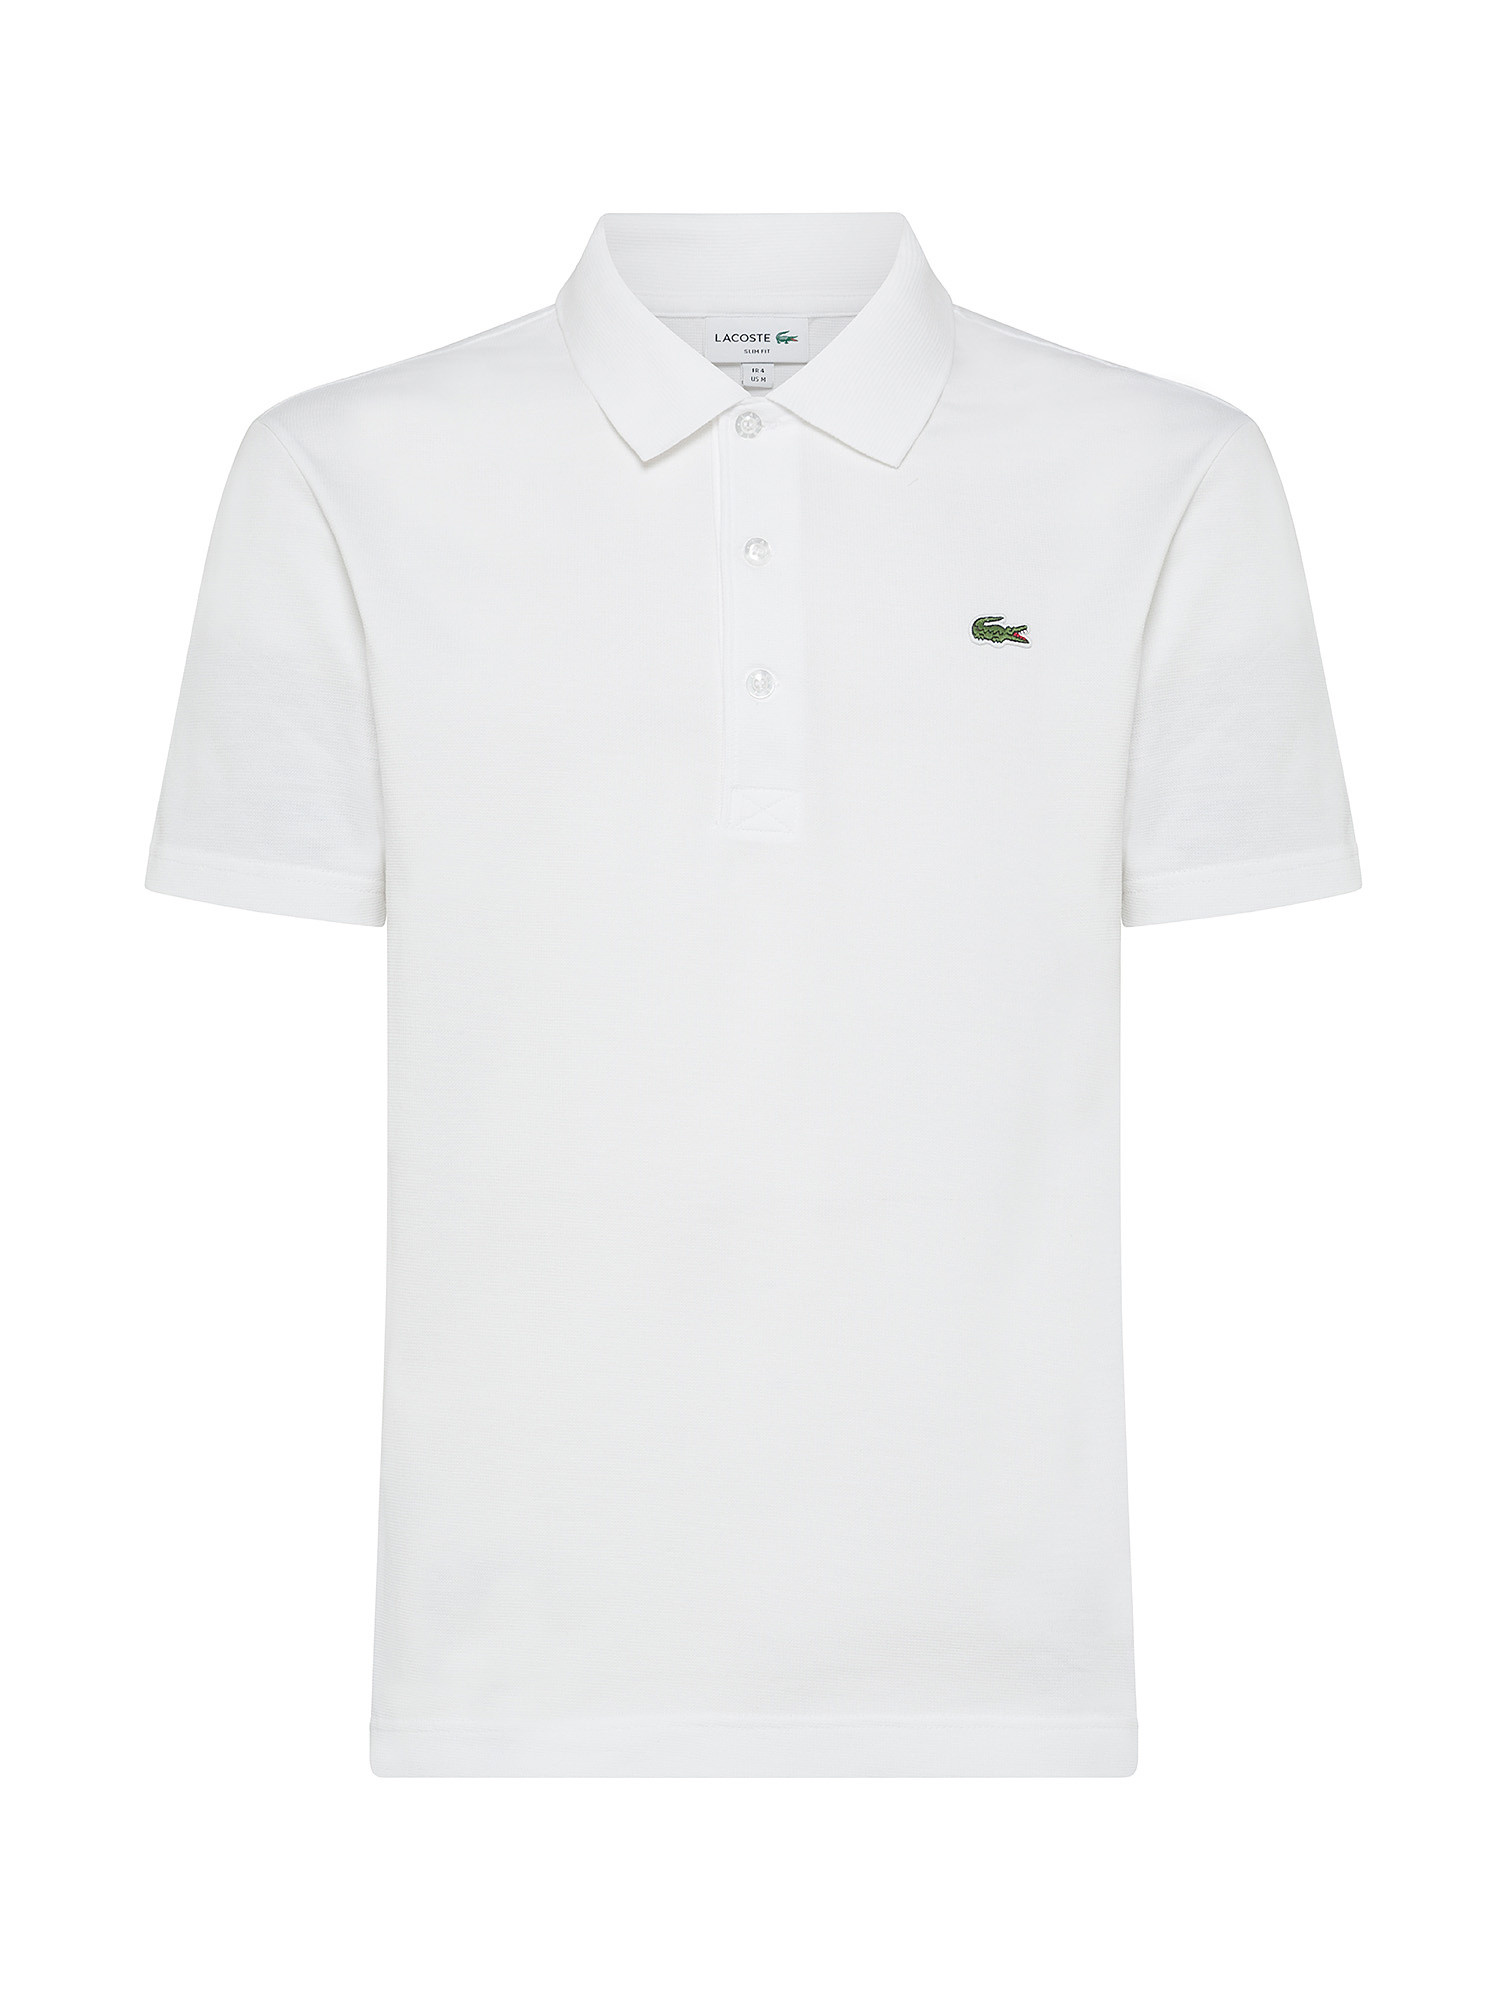 Lacoste - Polo stretch regular fit, Bianco, large image number 0